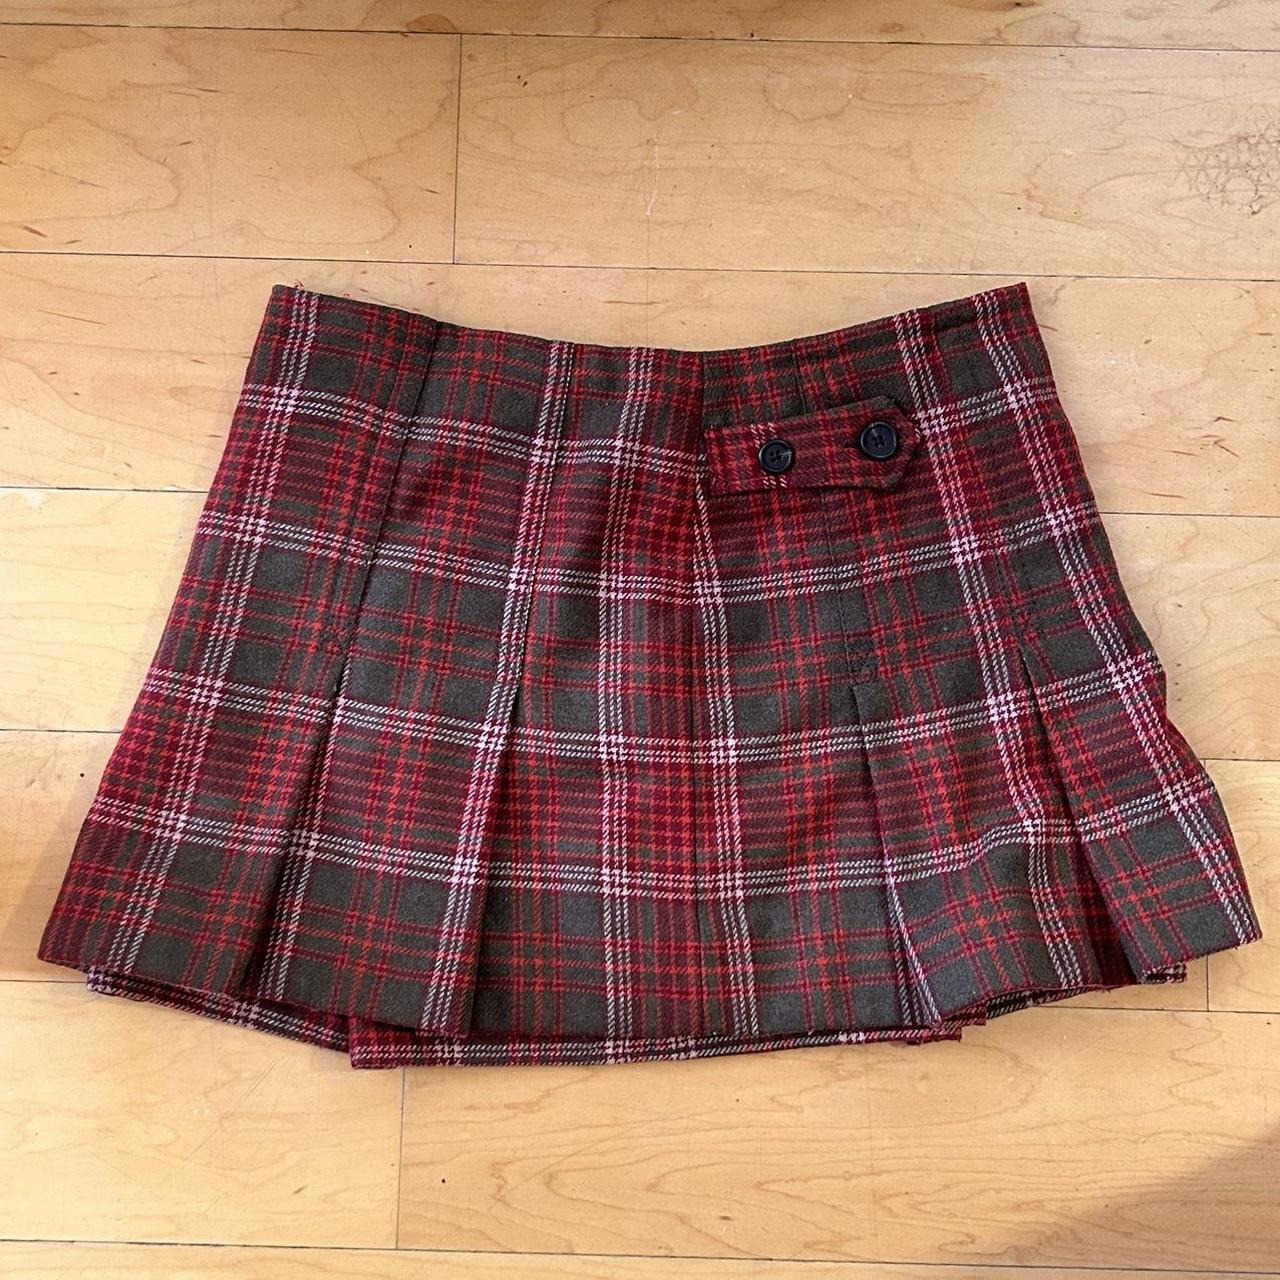 Plaid Pleated Mini Skirt !! MOVING AND NEED TO... - Depop